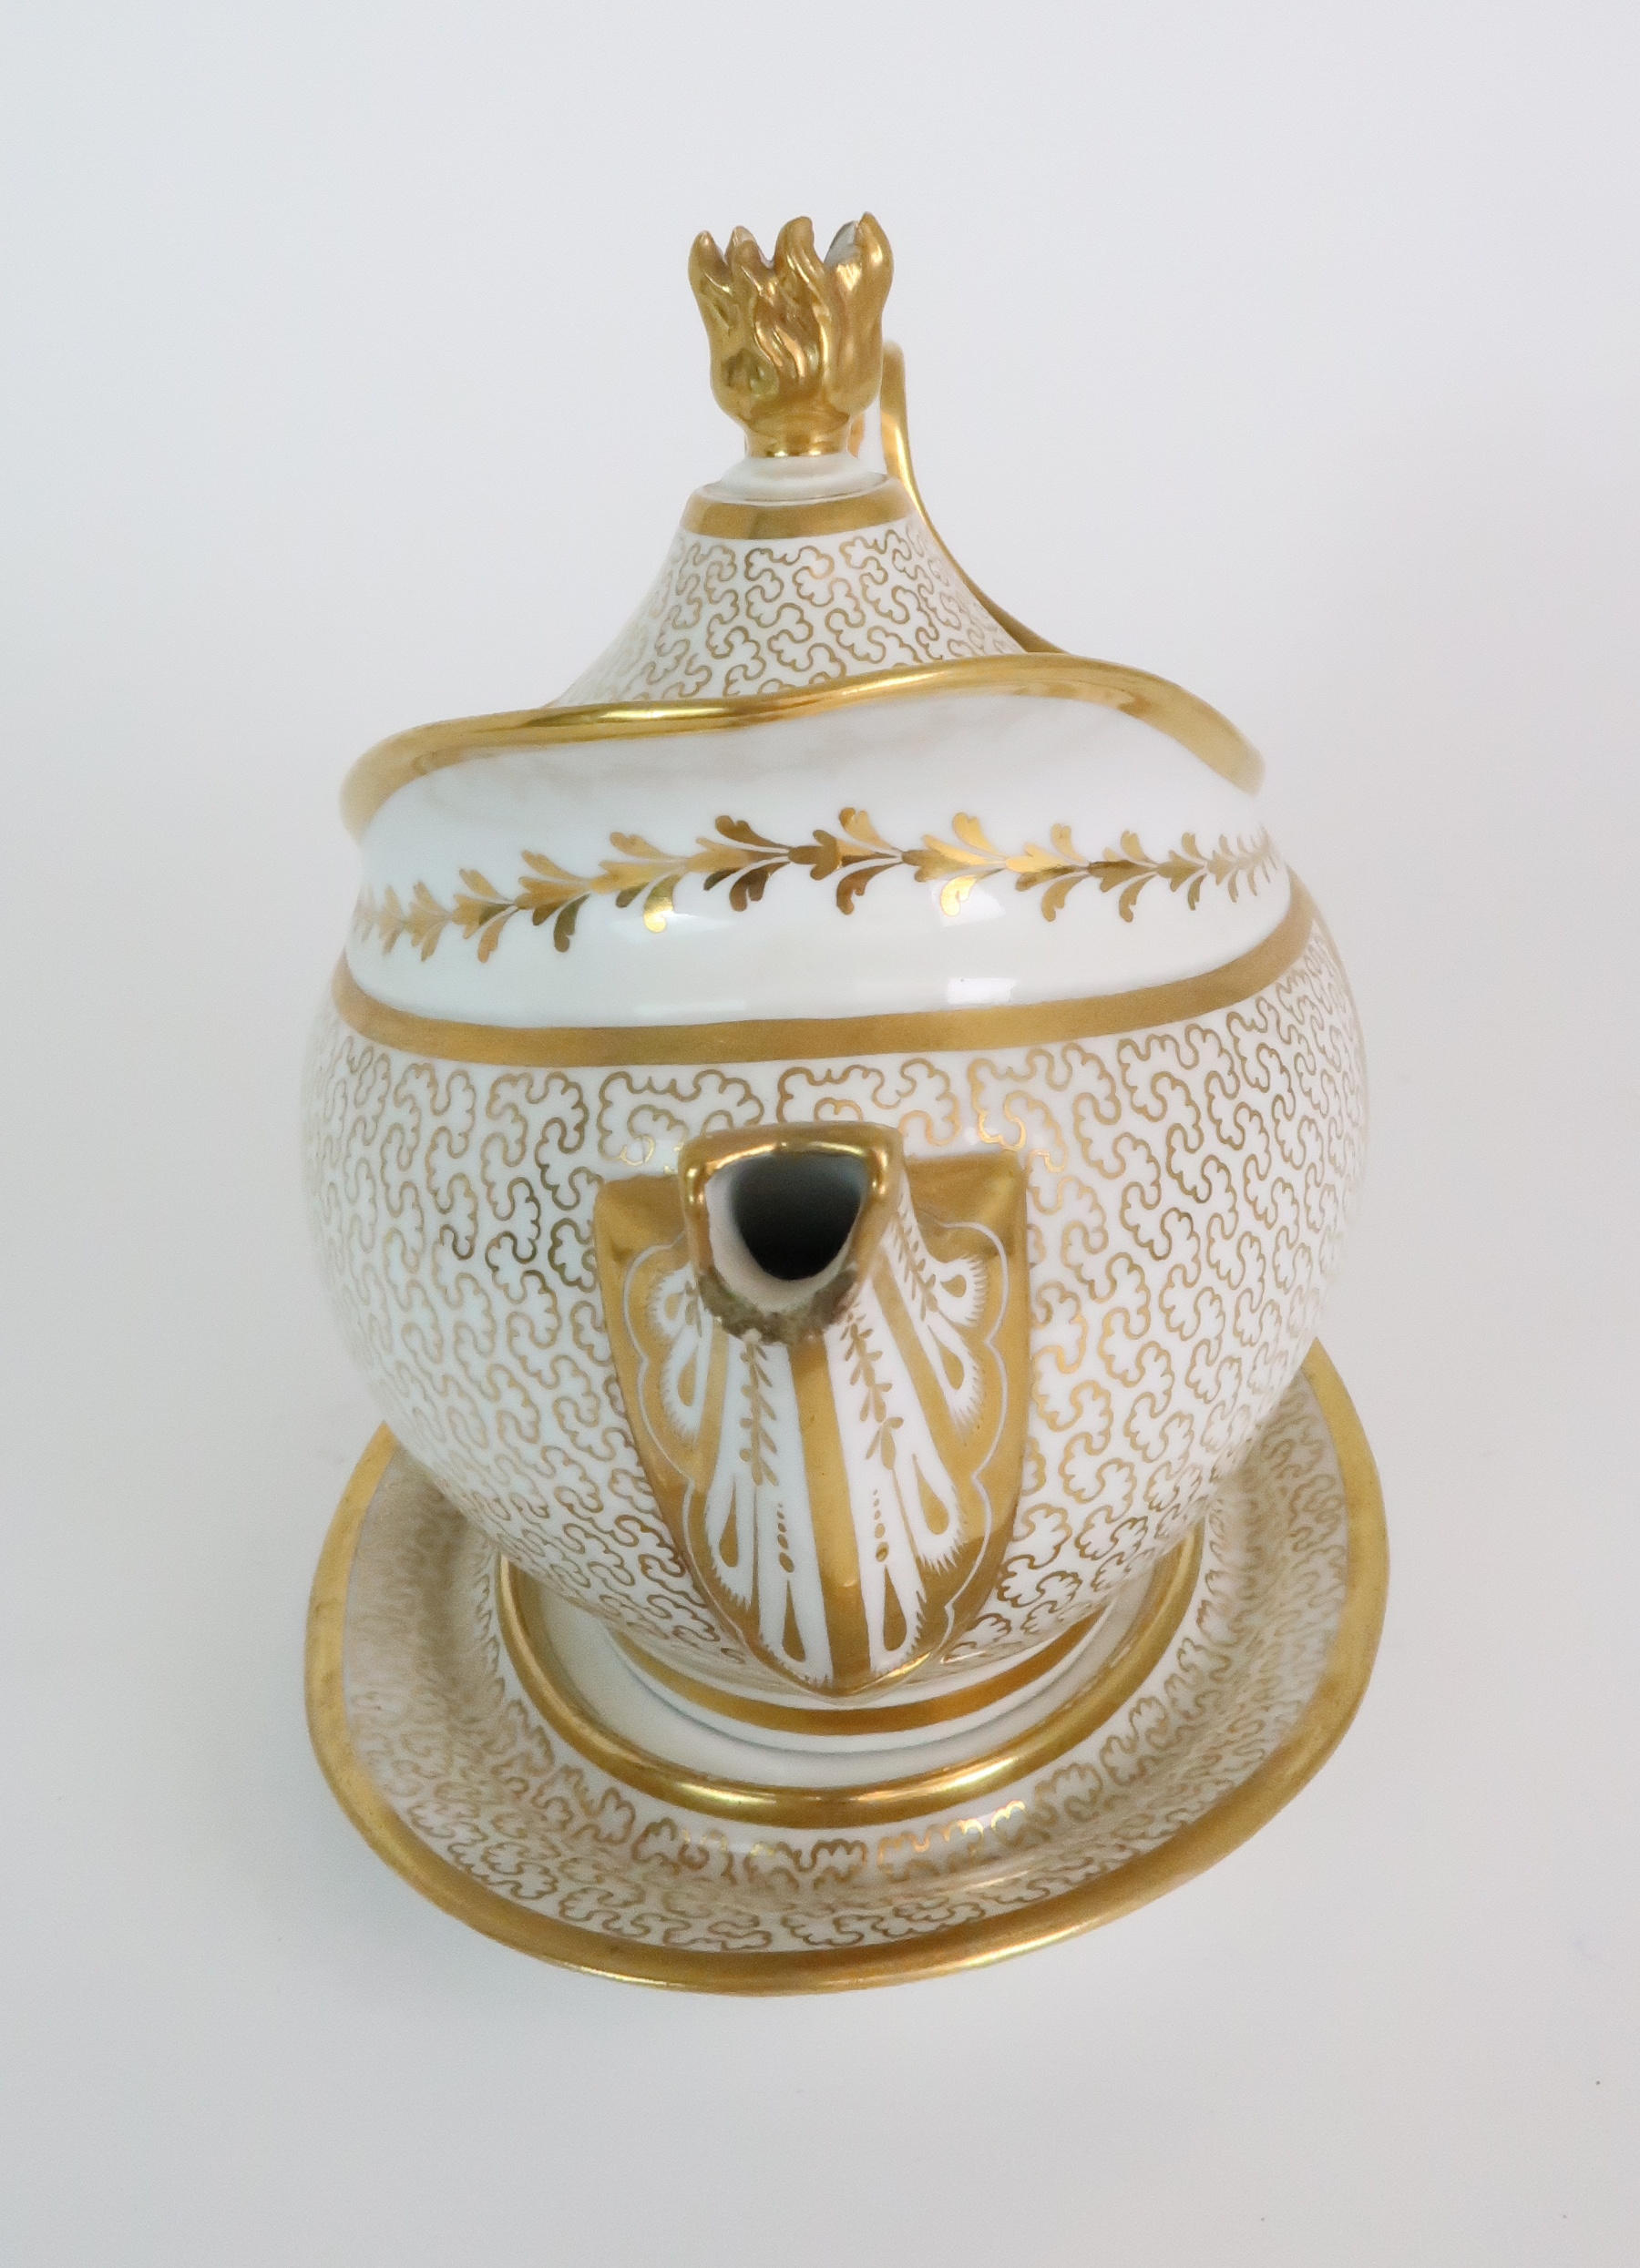 AN EARLY 19TH CENTURY BARR FLIGHT & BARR OVAL TEAPOT, COVER AND MATCHING STAND the cover with gilt - Image 4 of 8